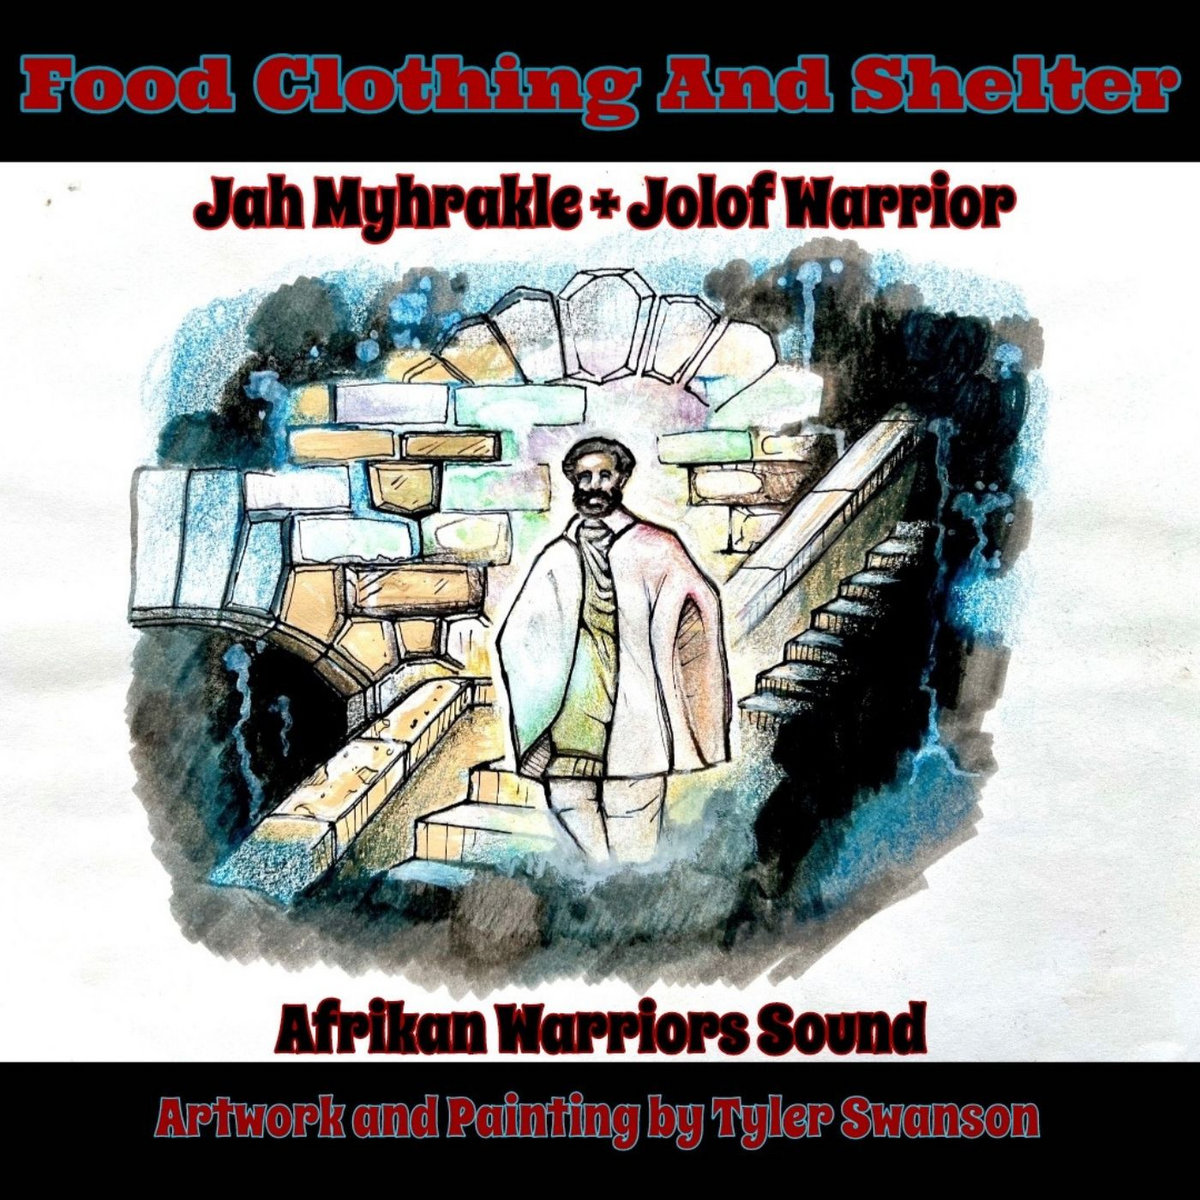 Food Clothing and Shelter, Jah Myhrakle, Jolof Warrior and Afrikan  Warriors